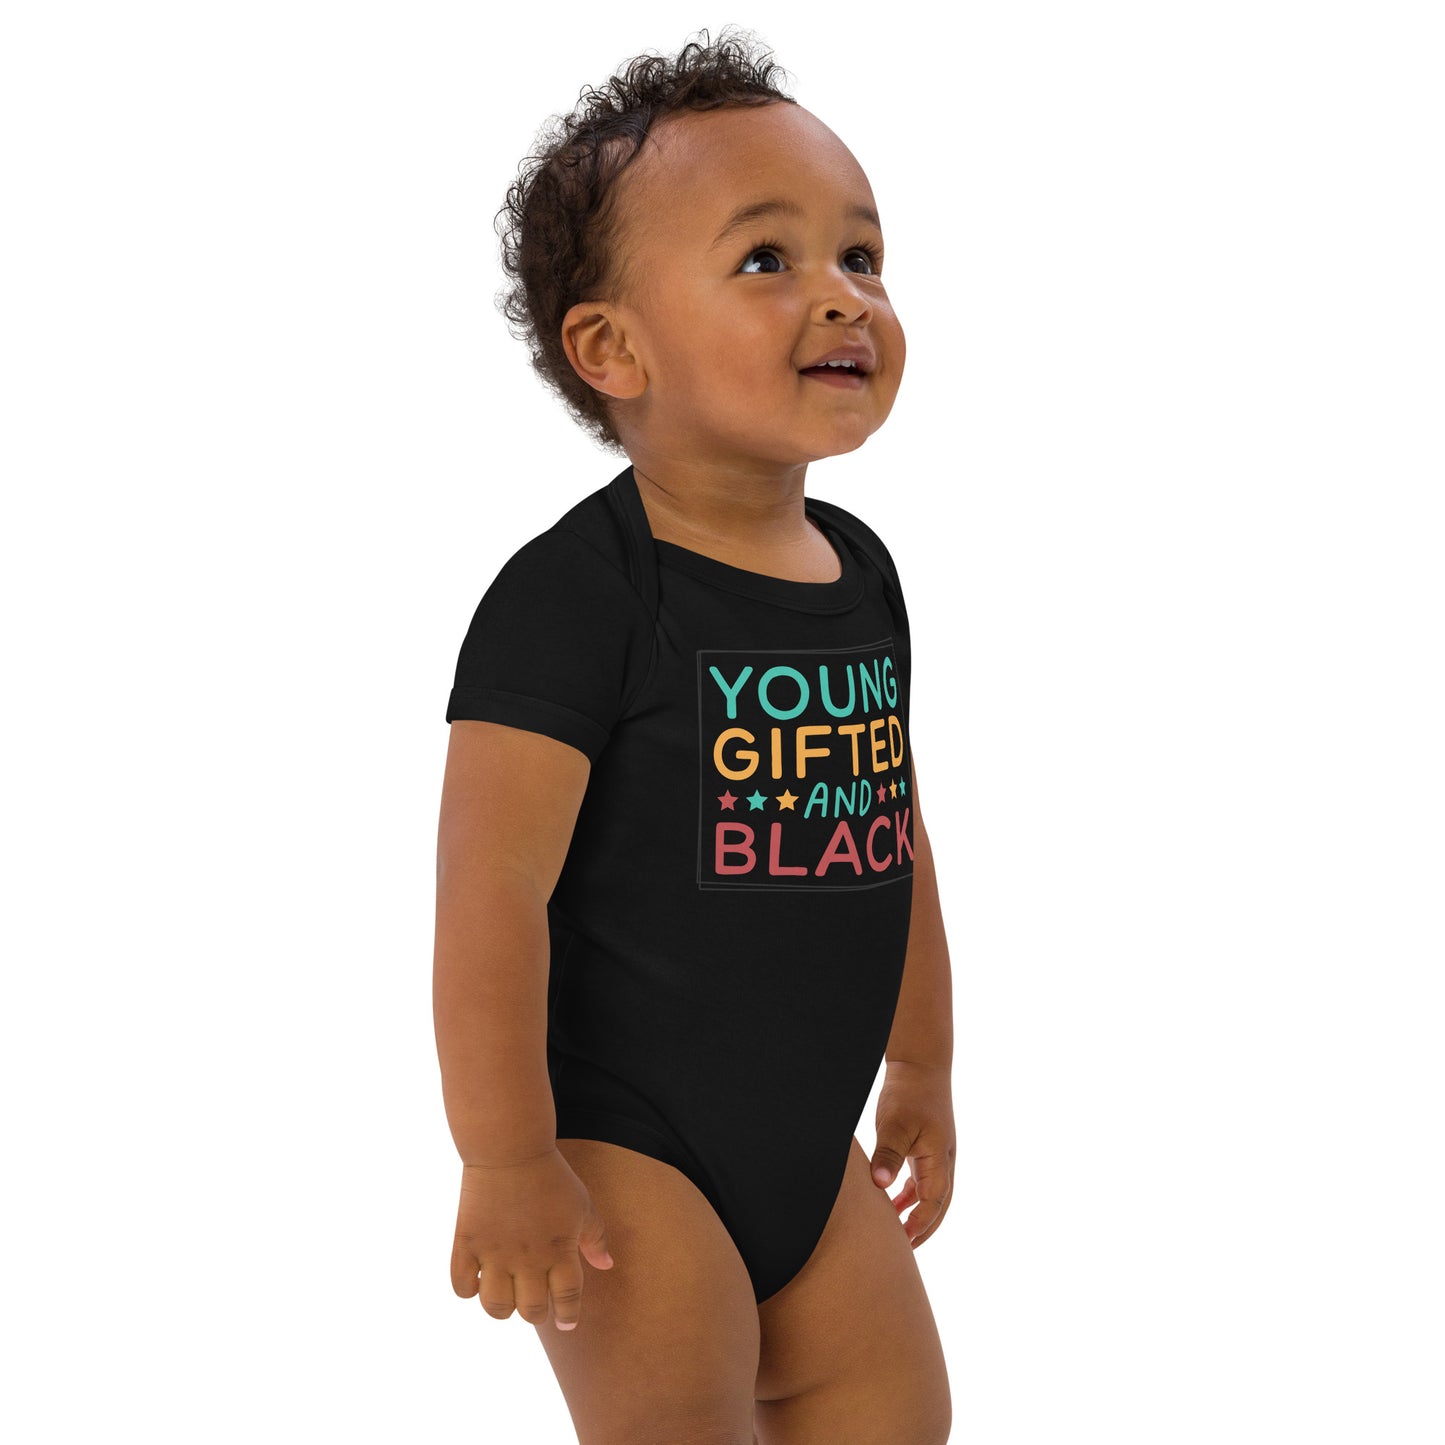 Organic cotton baby bodysuit - Juneteenth Young Gifted and Black